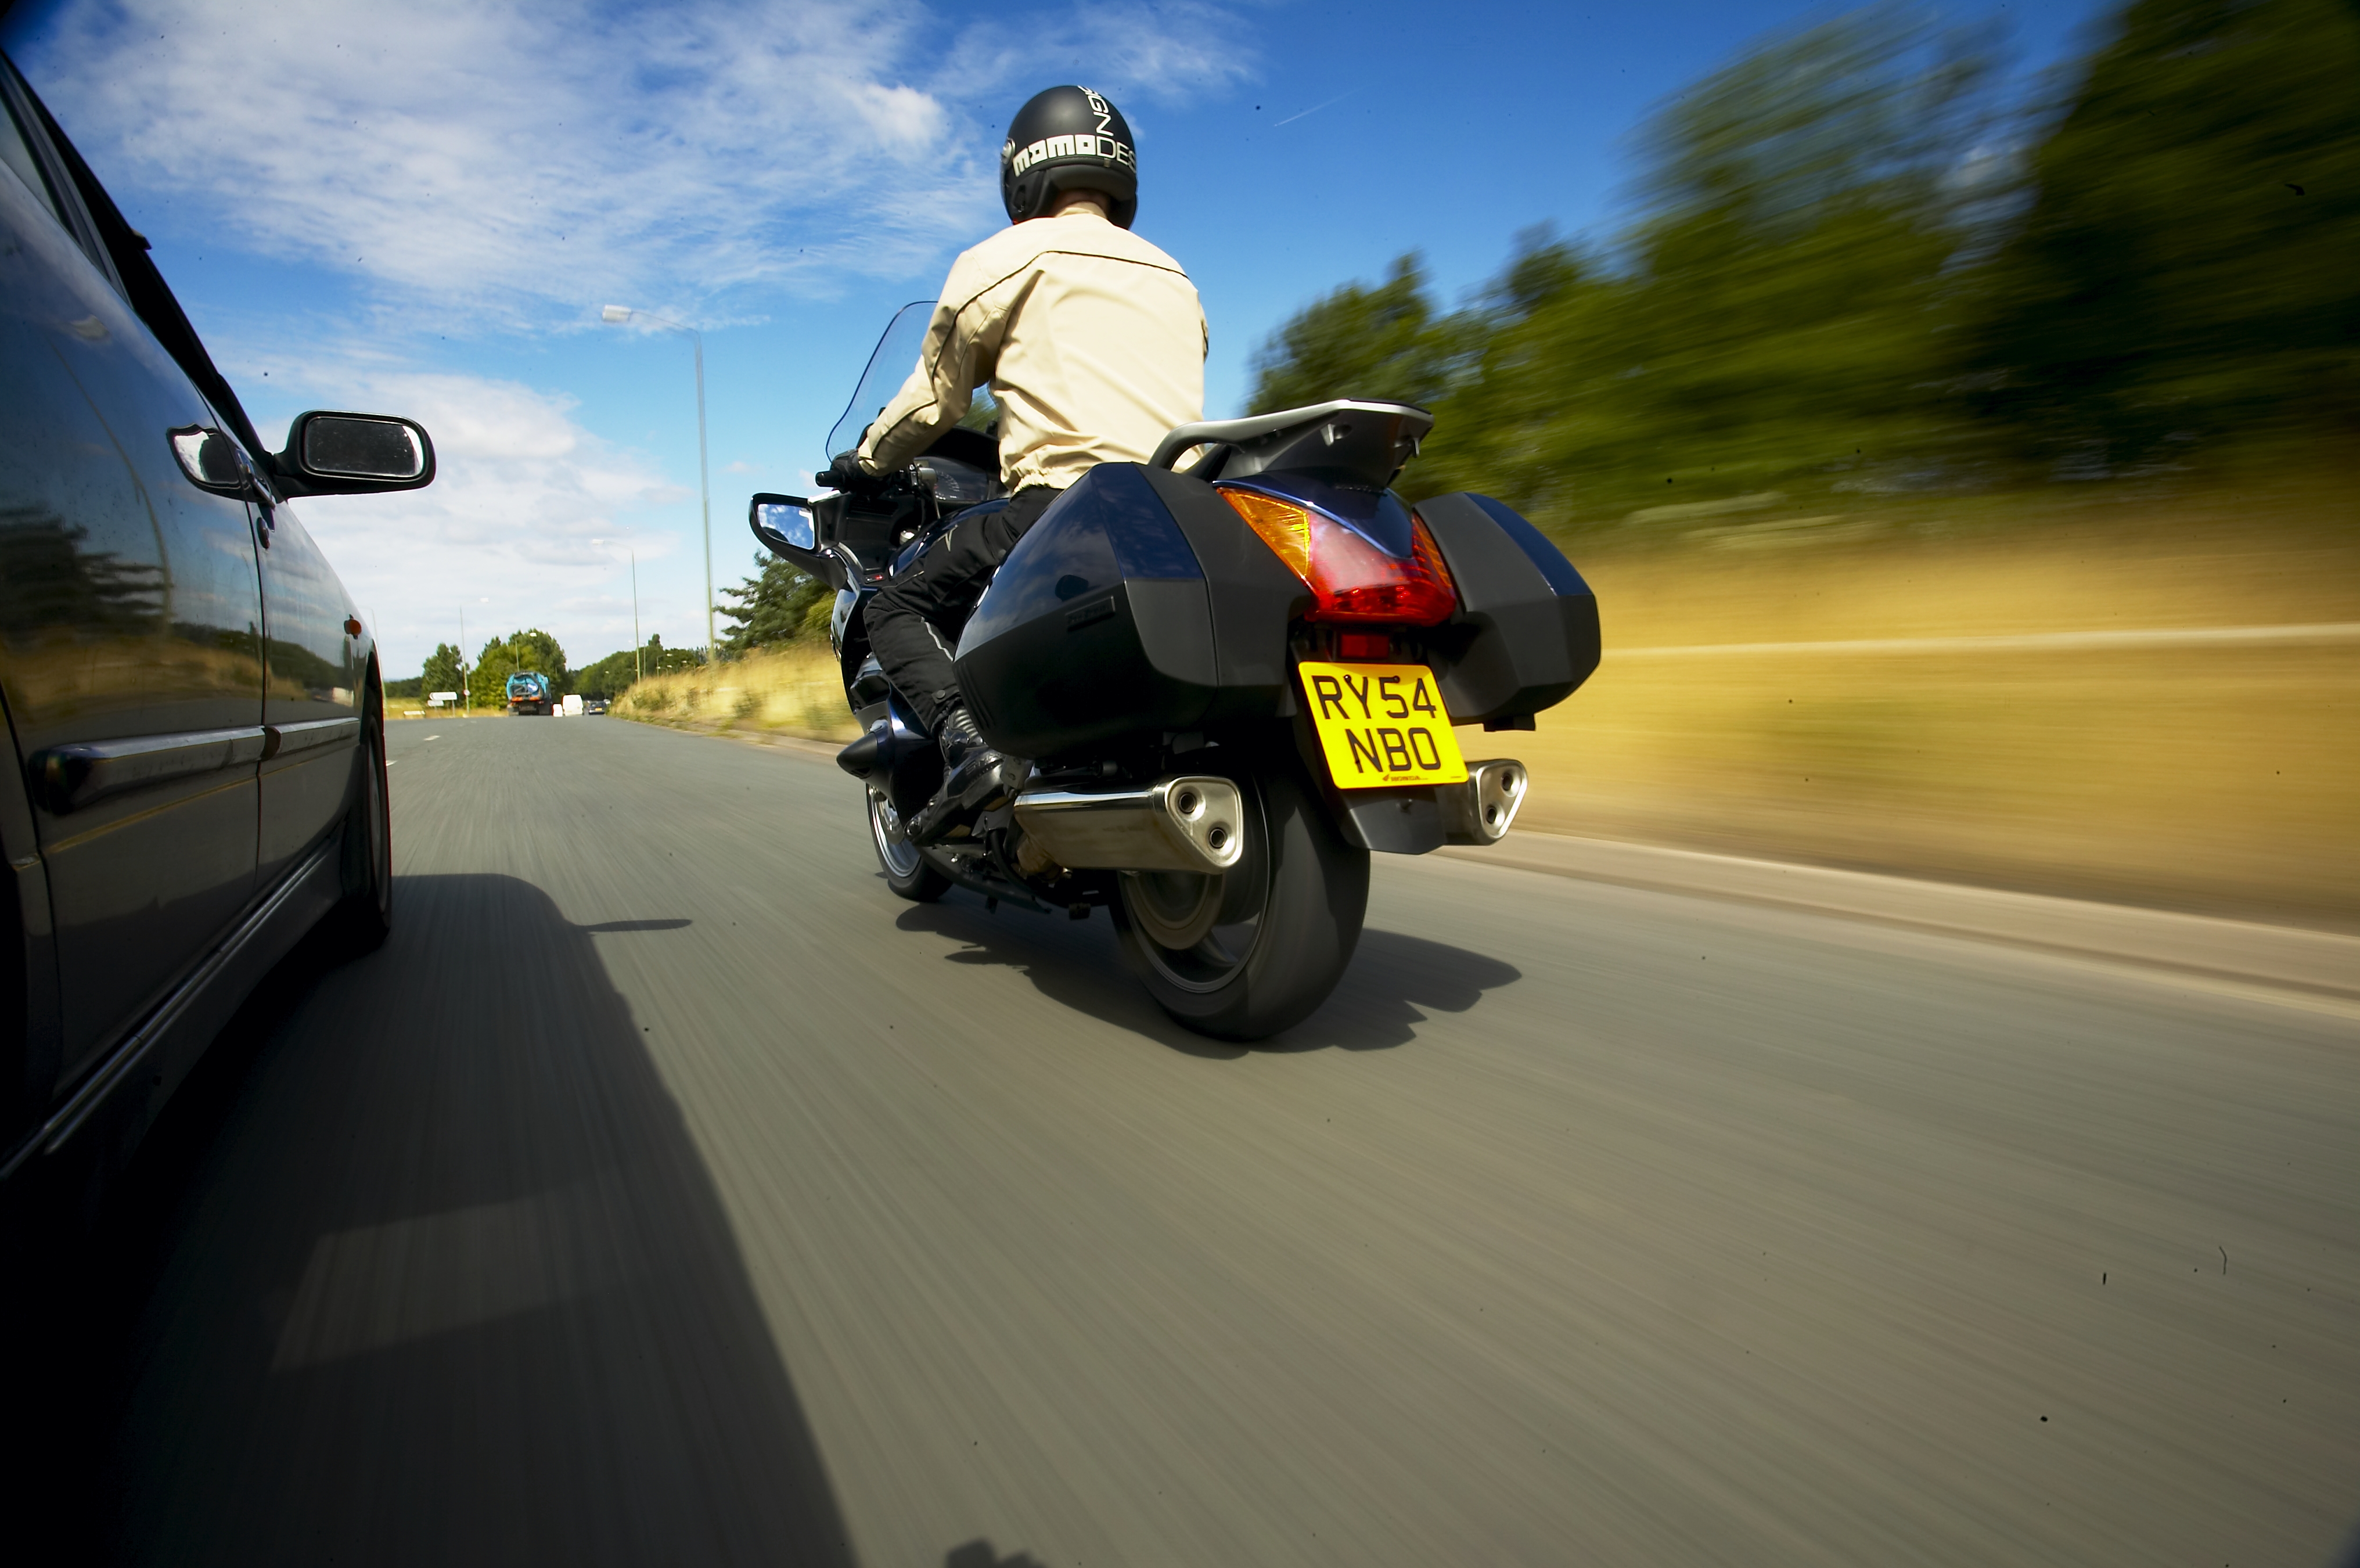 How much can you save by commuting by motorcycle?